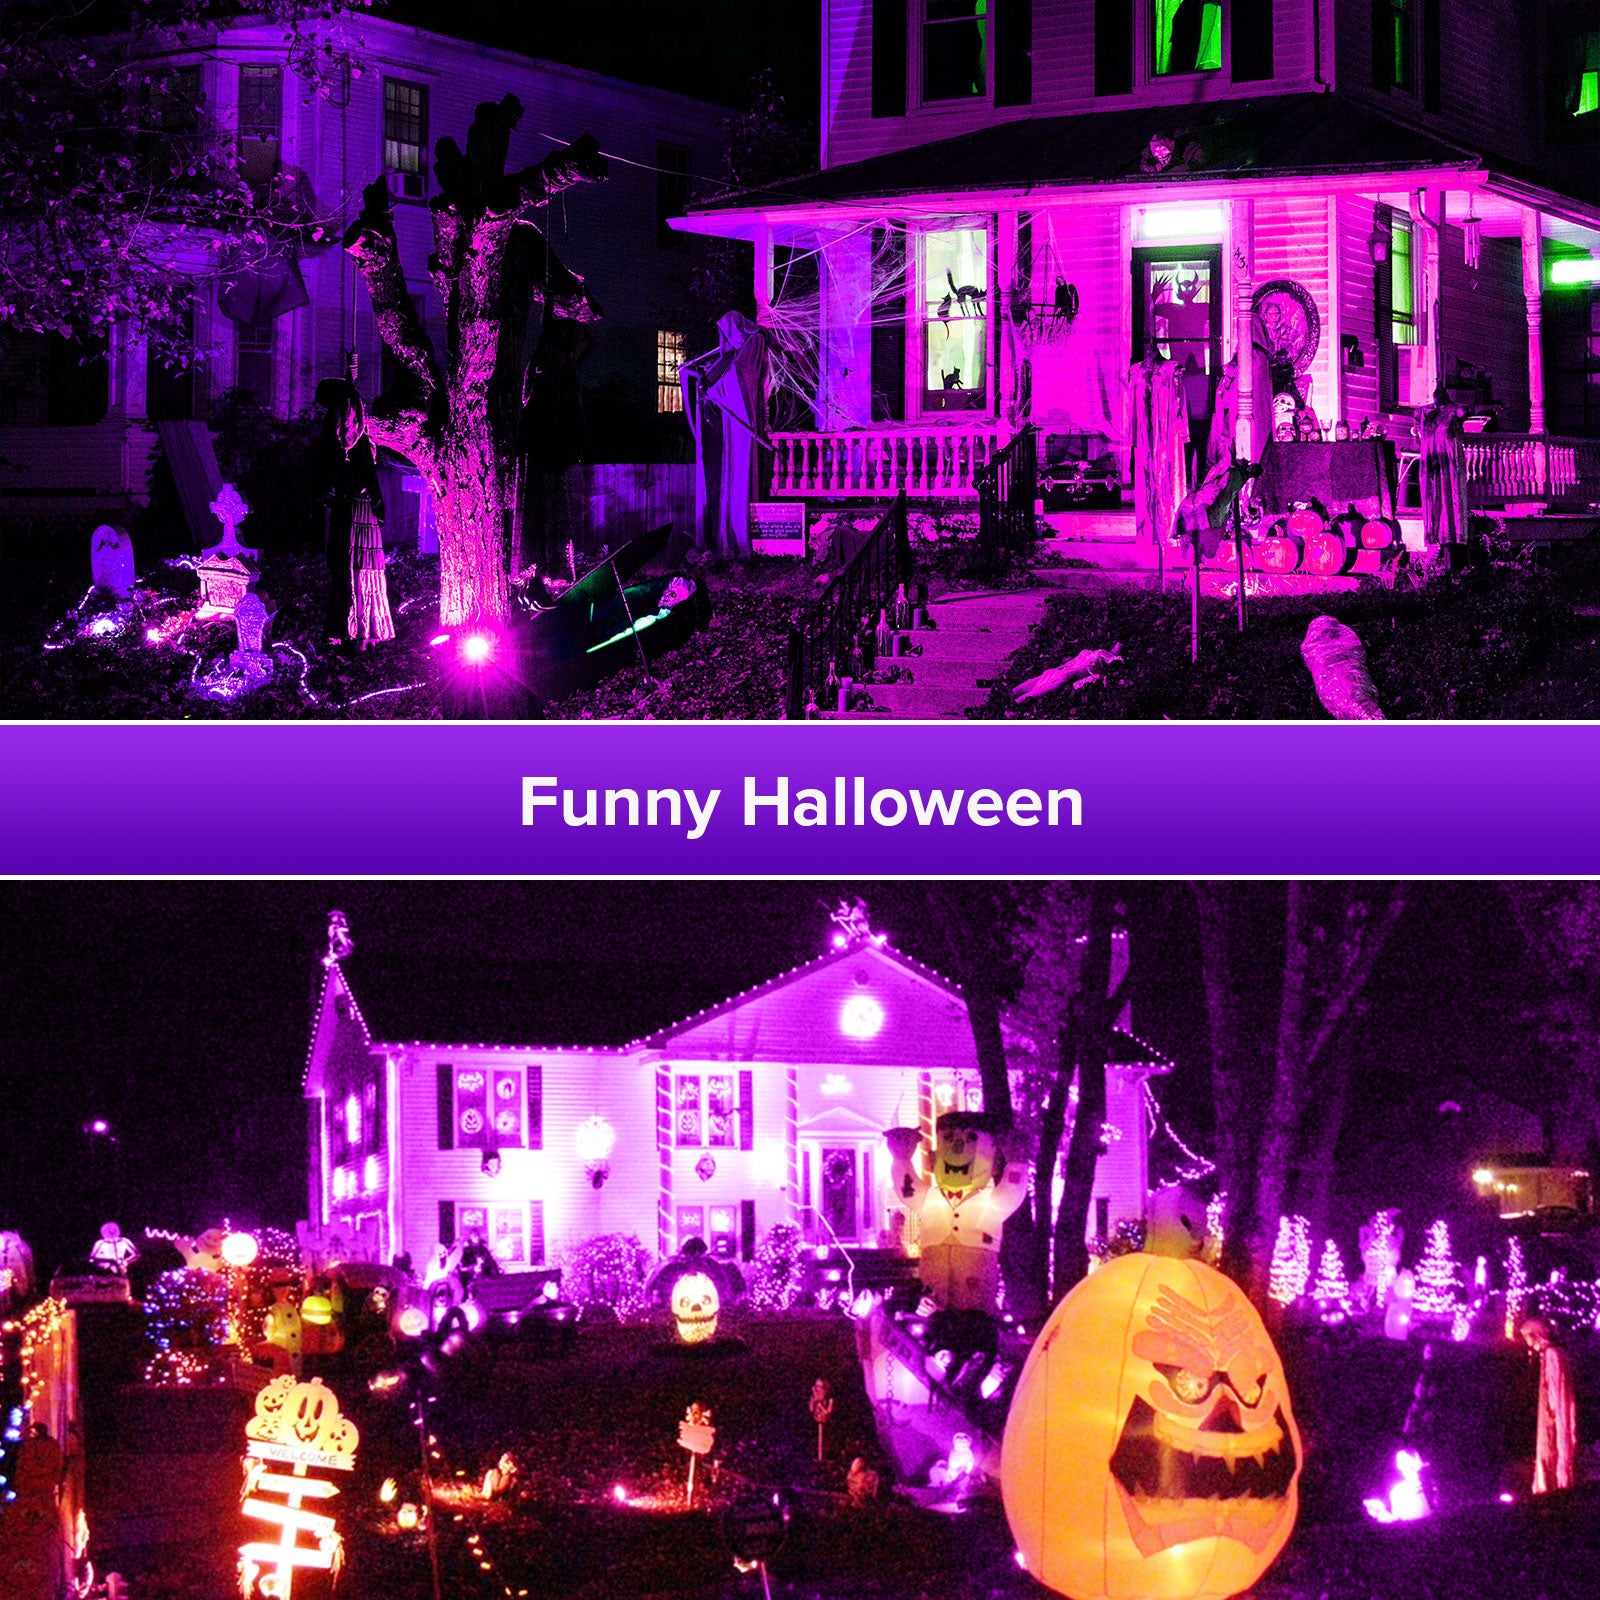 RGB 70W LED Black Light suitable for funny halloween